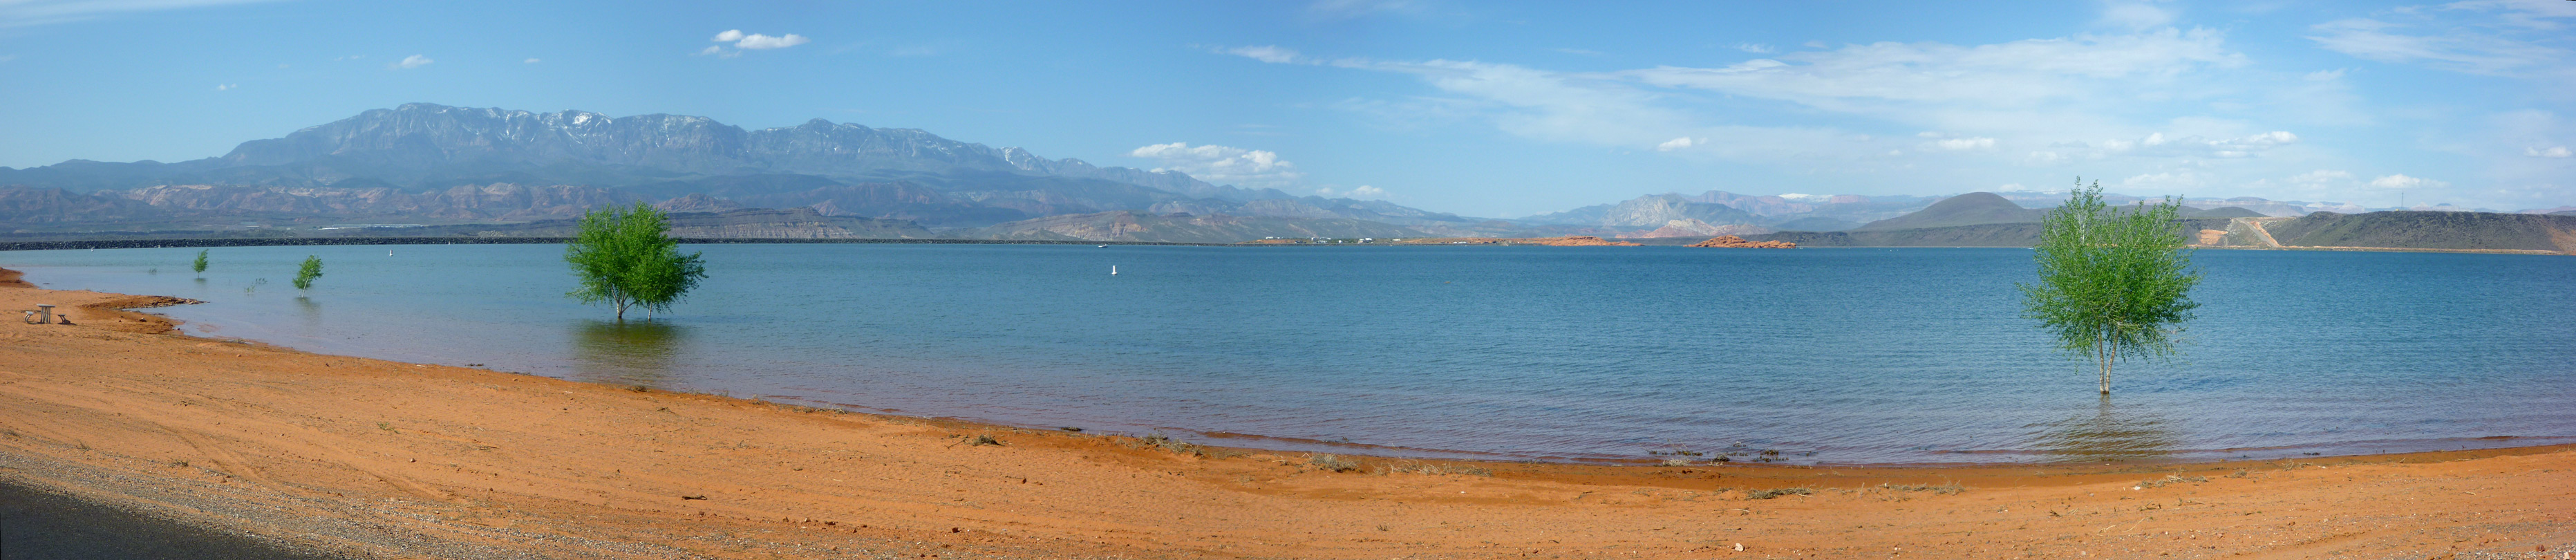 Sand Hollow Reservoir from the south side